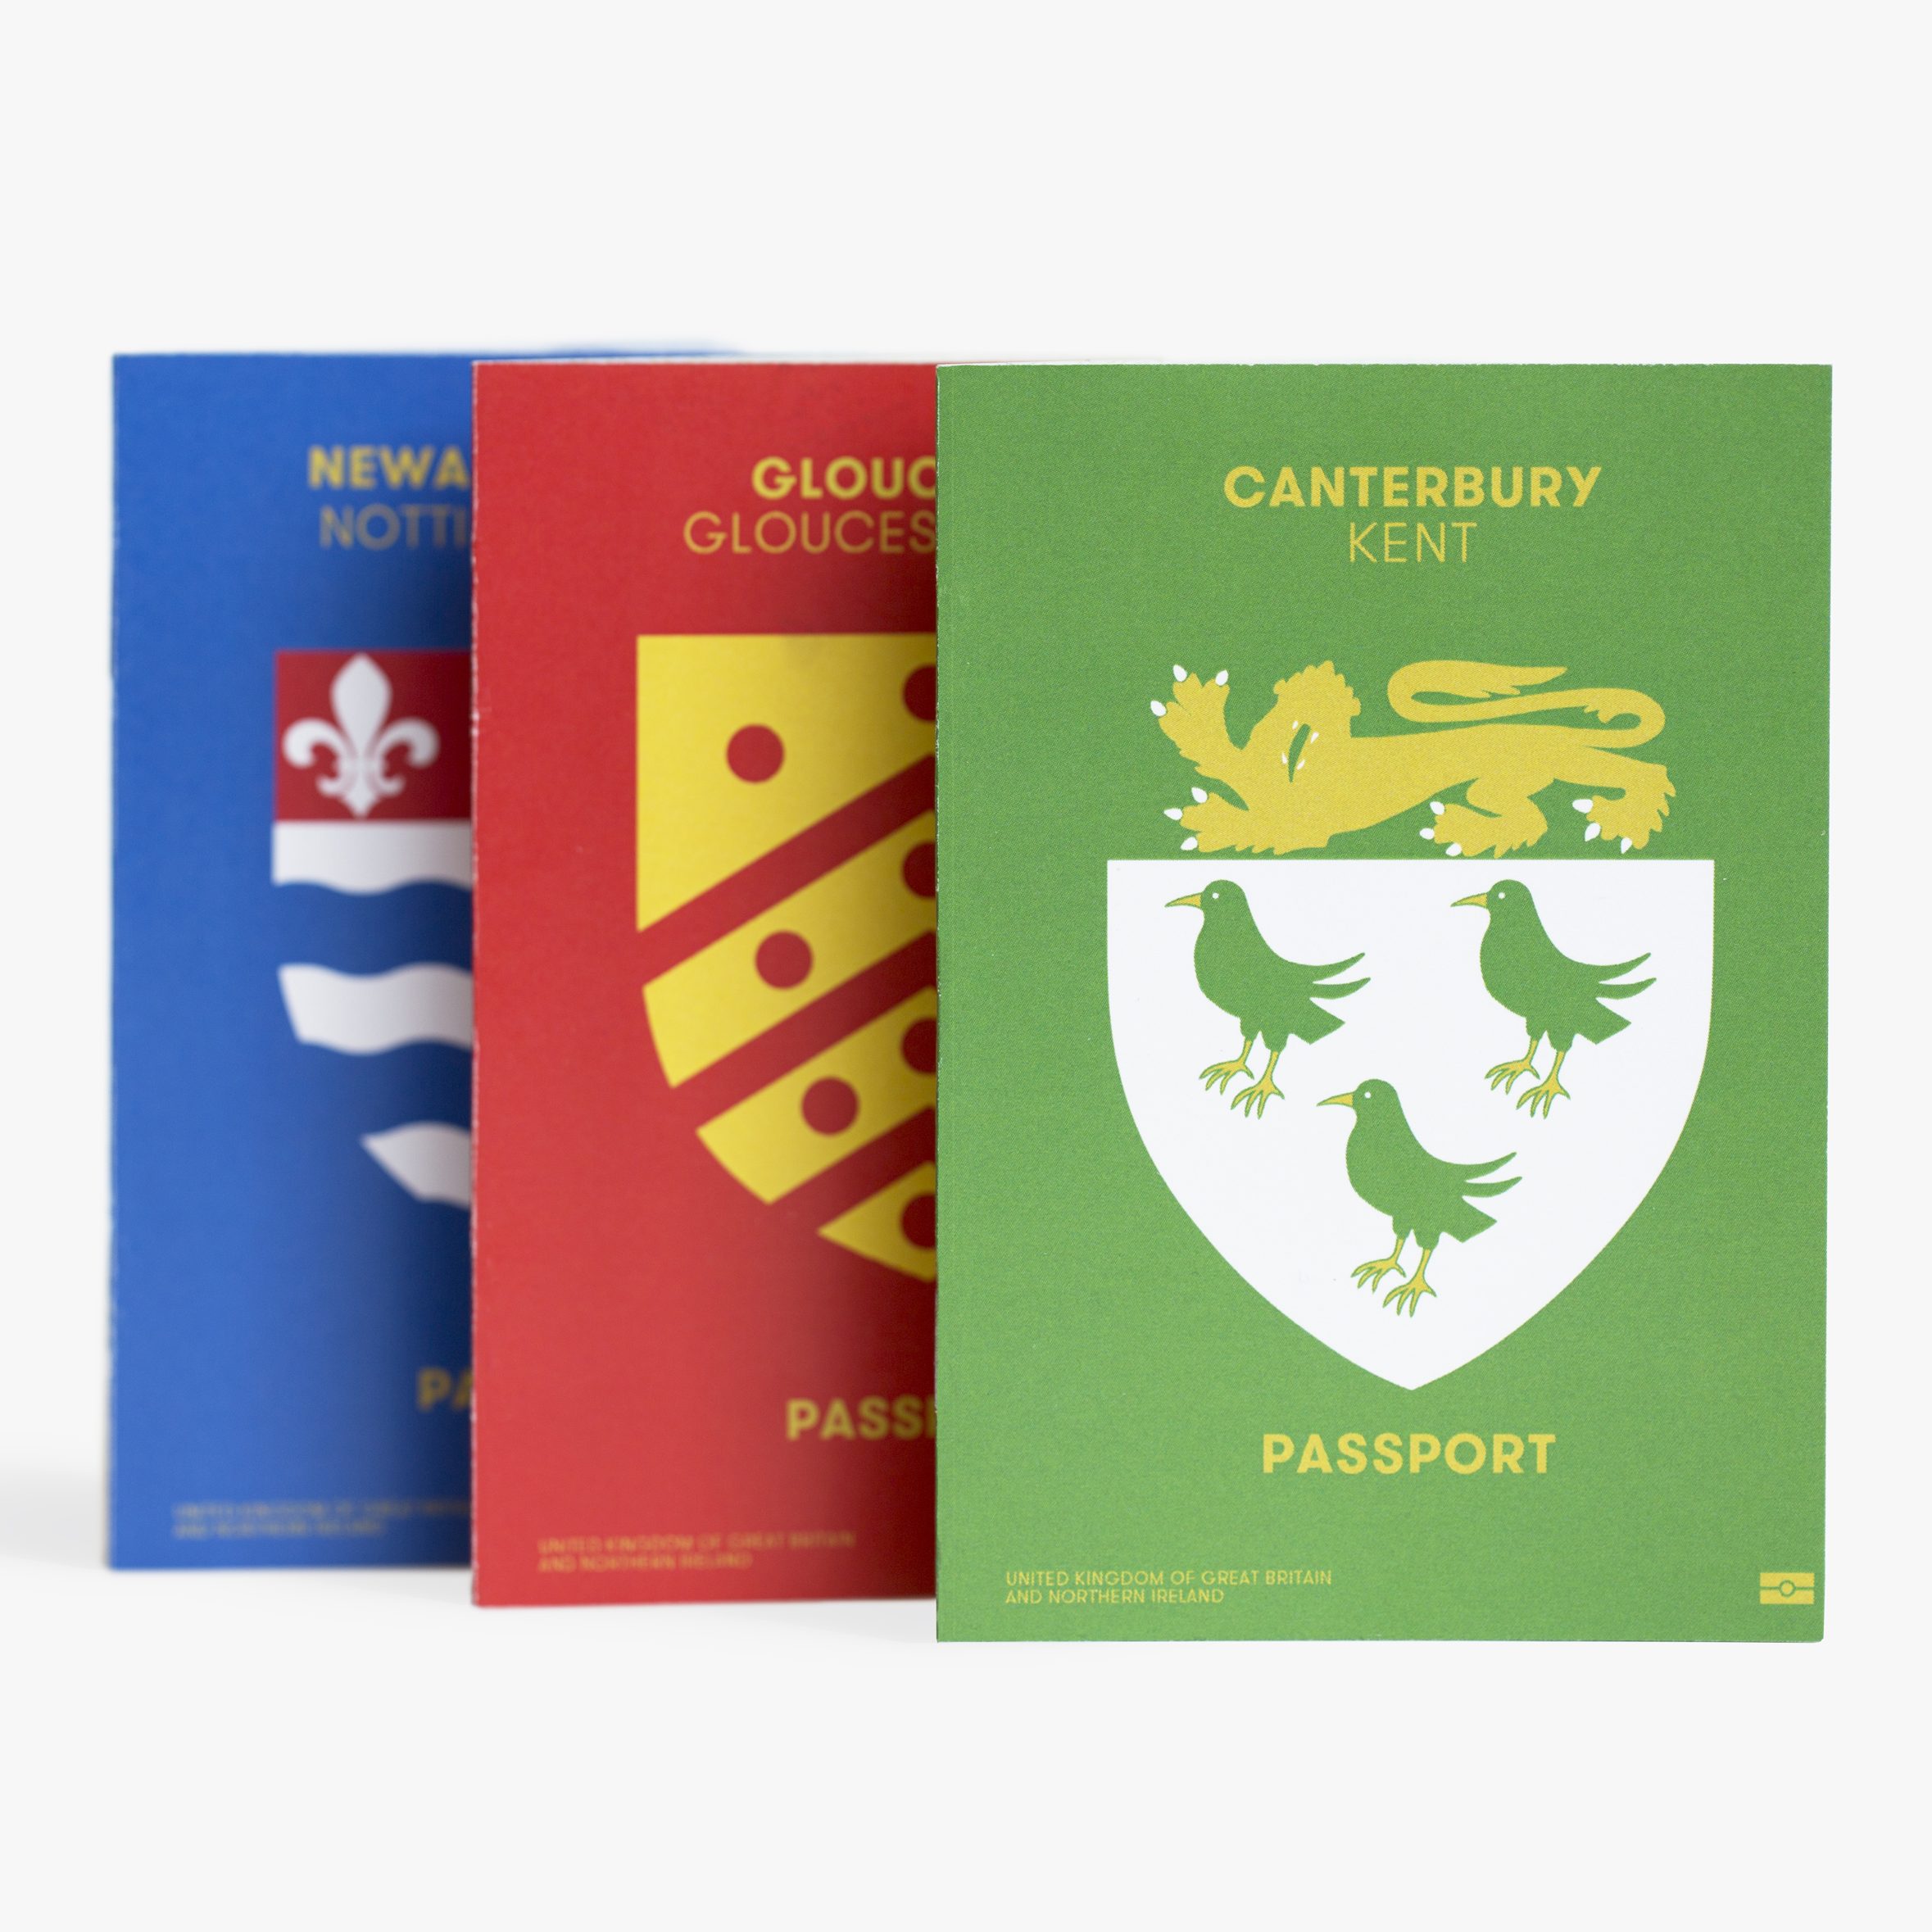 Passport design by Tim Gambell and Alfons Hooikaas